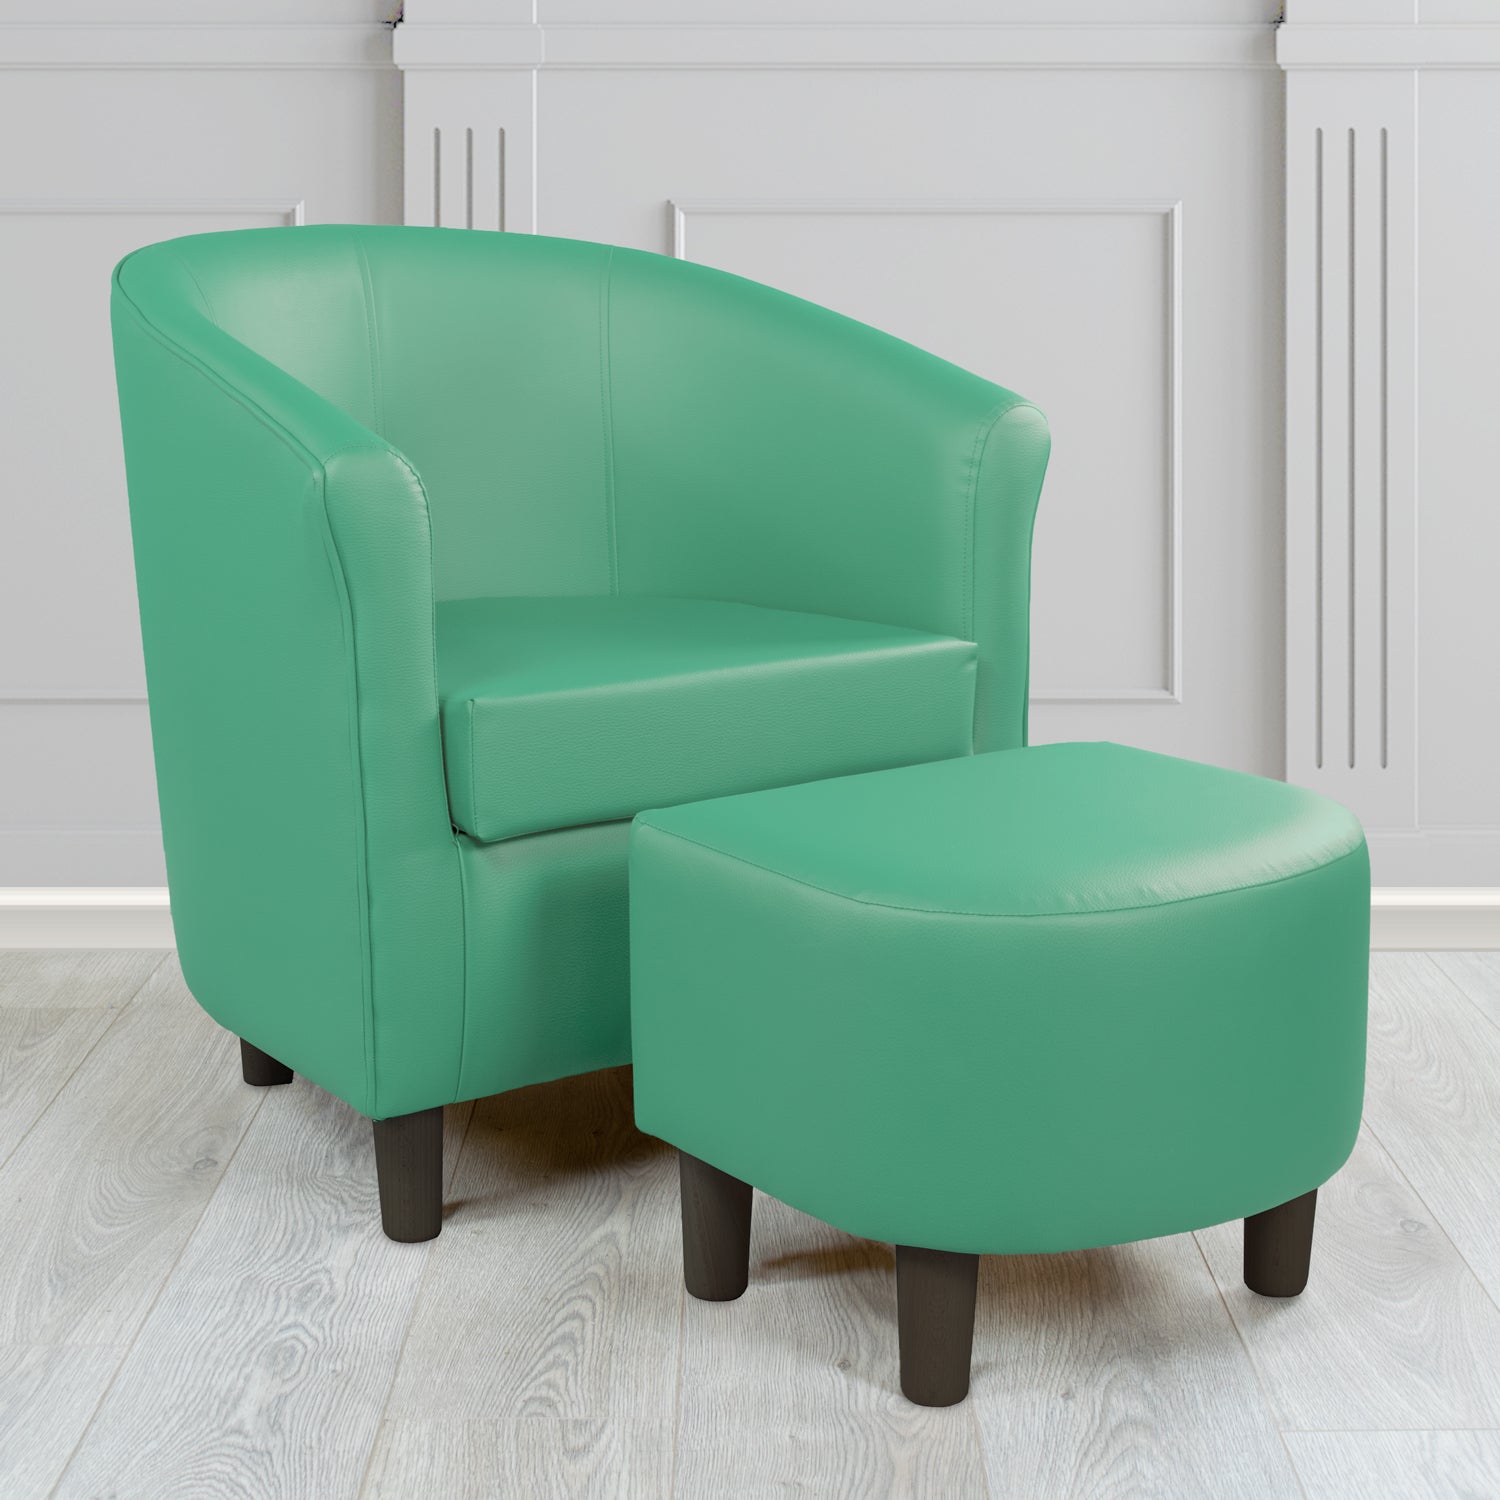 Tuscany Just Colour Applemint Faux Leather Tub Chair with Dee Footstool Set - The Tub Chair Shop